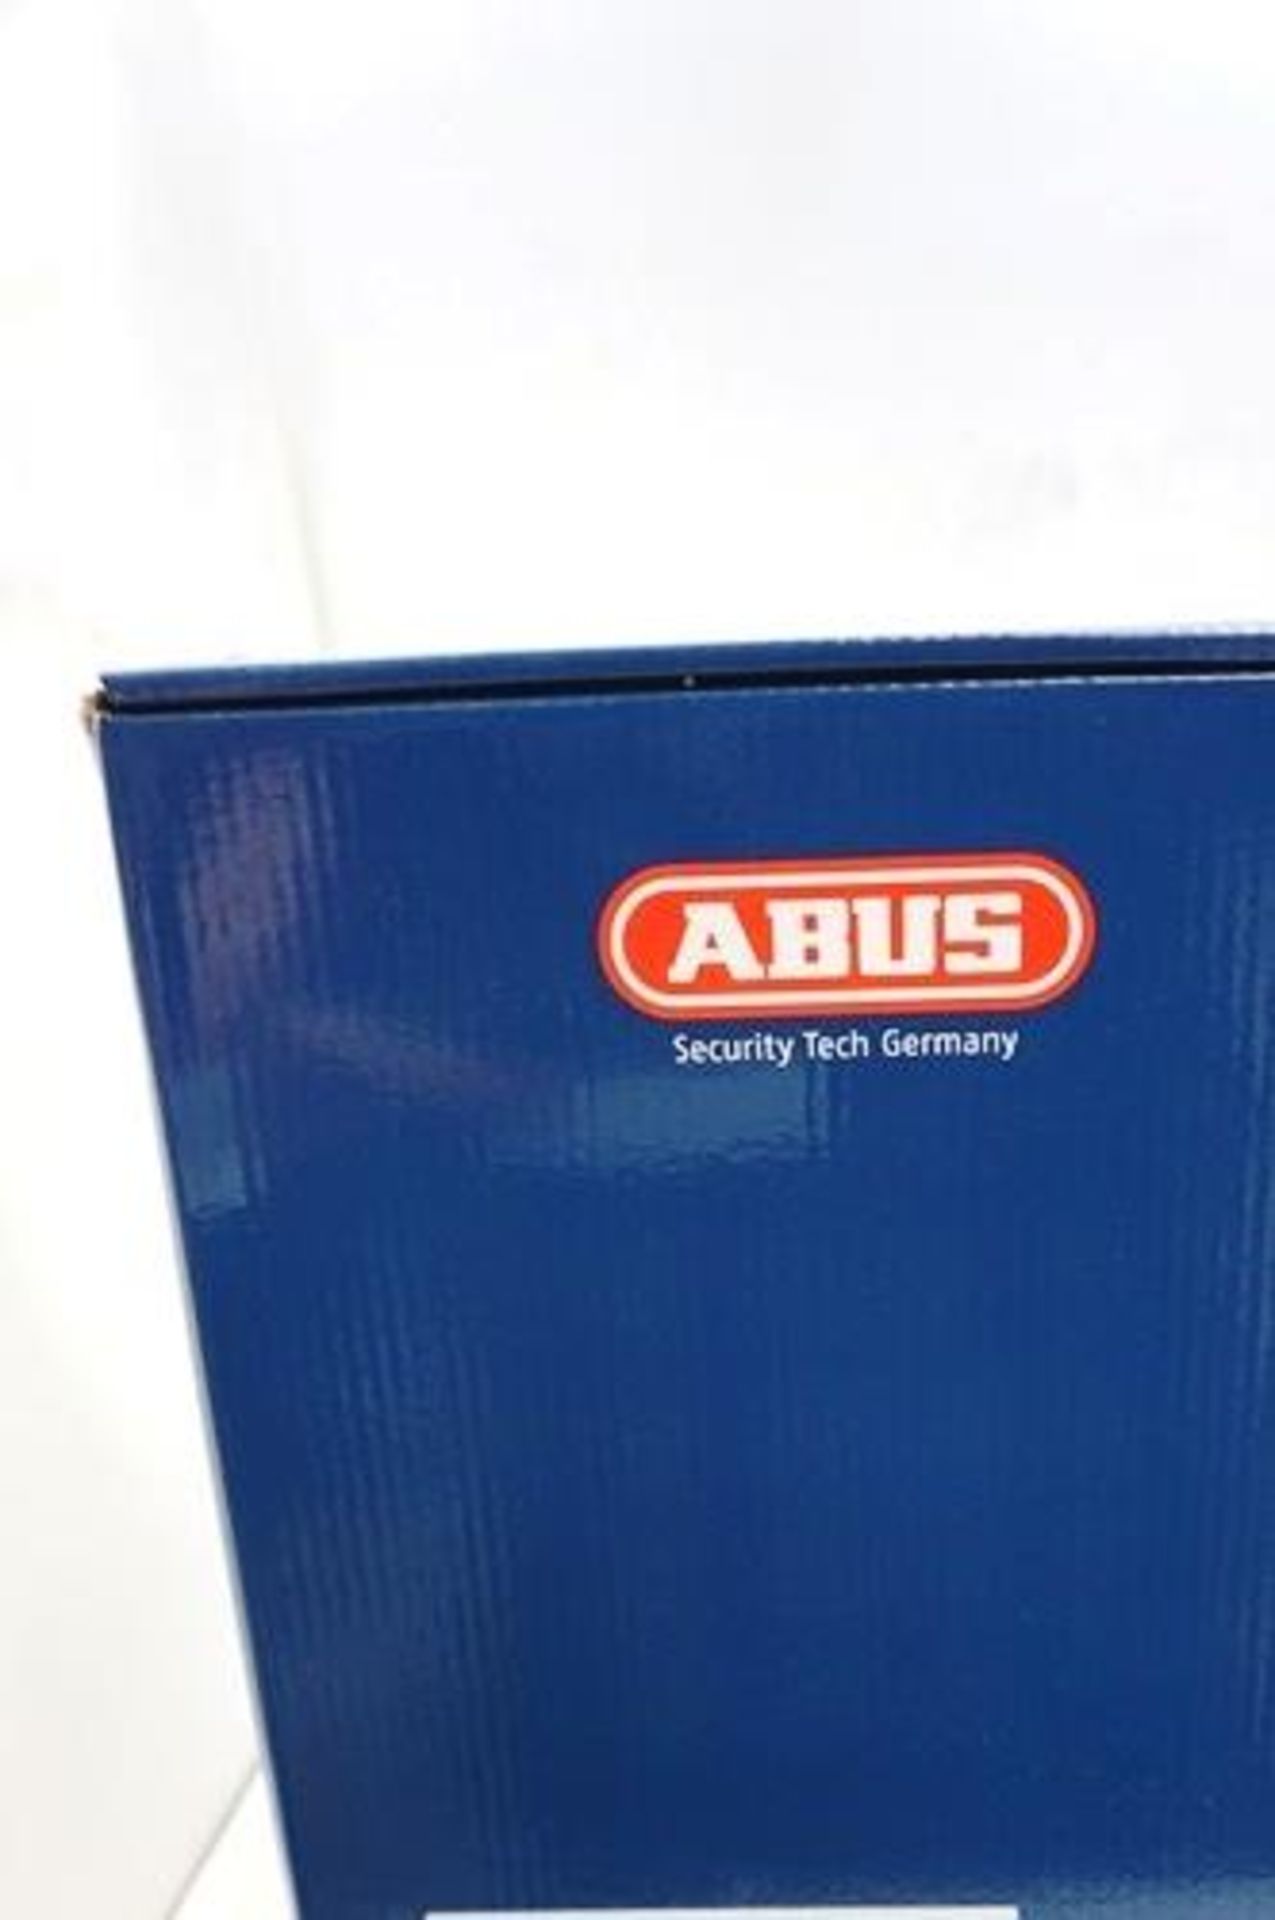 Abus Secvest touch wireless alarm system, model FUAA50500, control panel only - Sealed new in box ( - Image 2 of 2